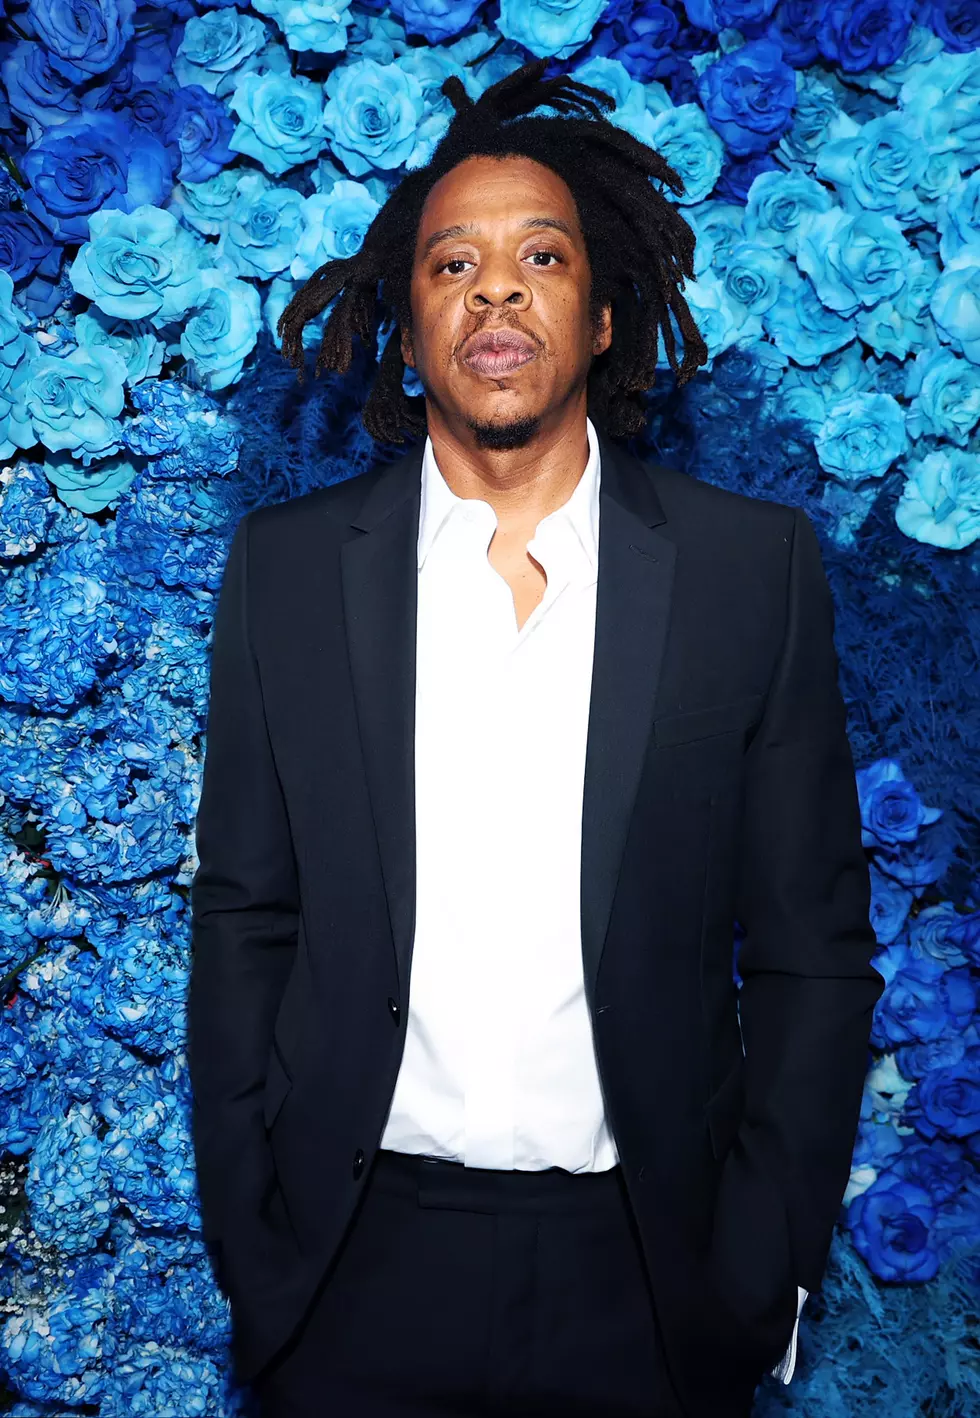 Jay-Z & LVMH Are Now In The Bubbly Business Together